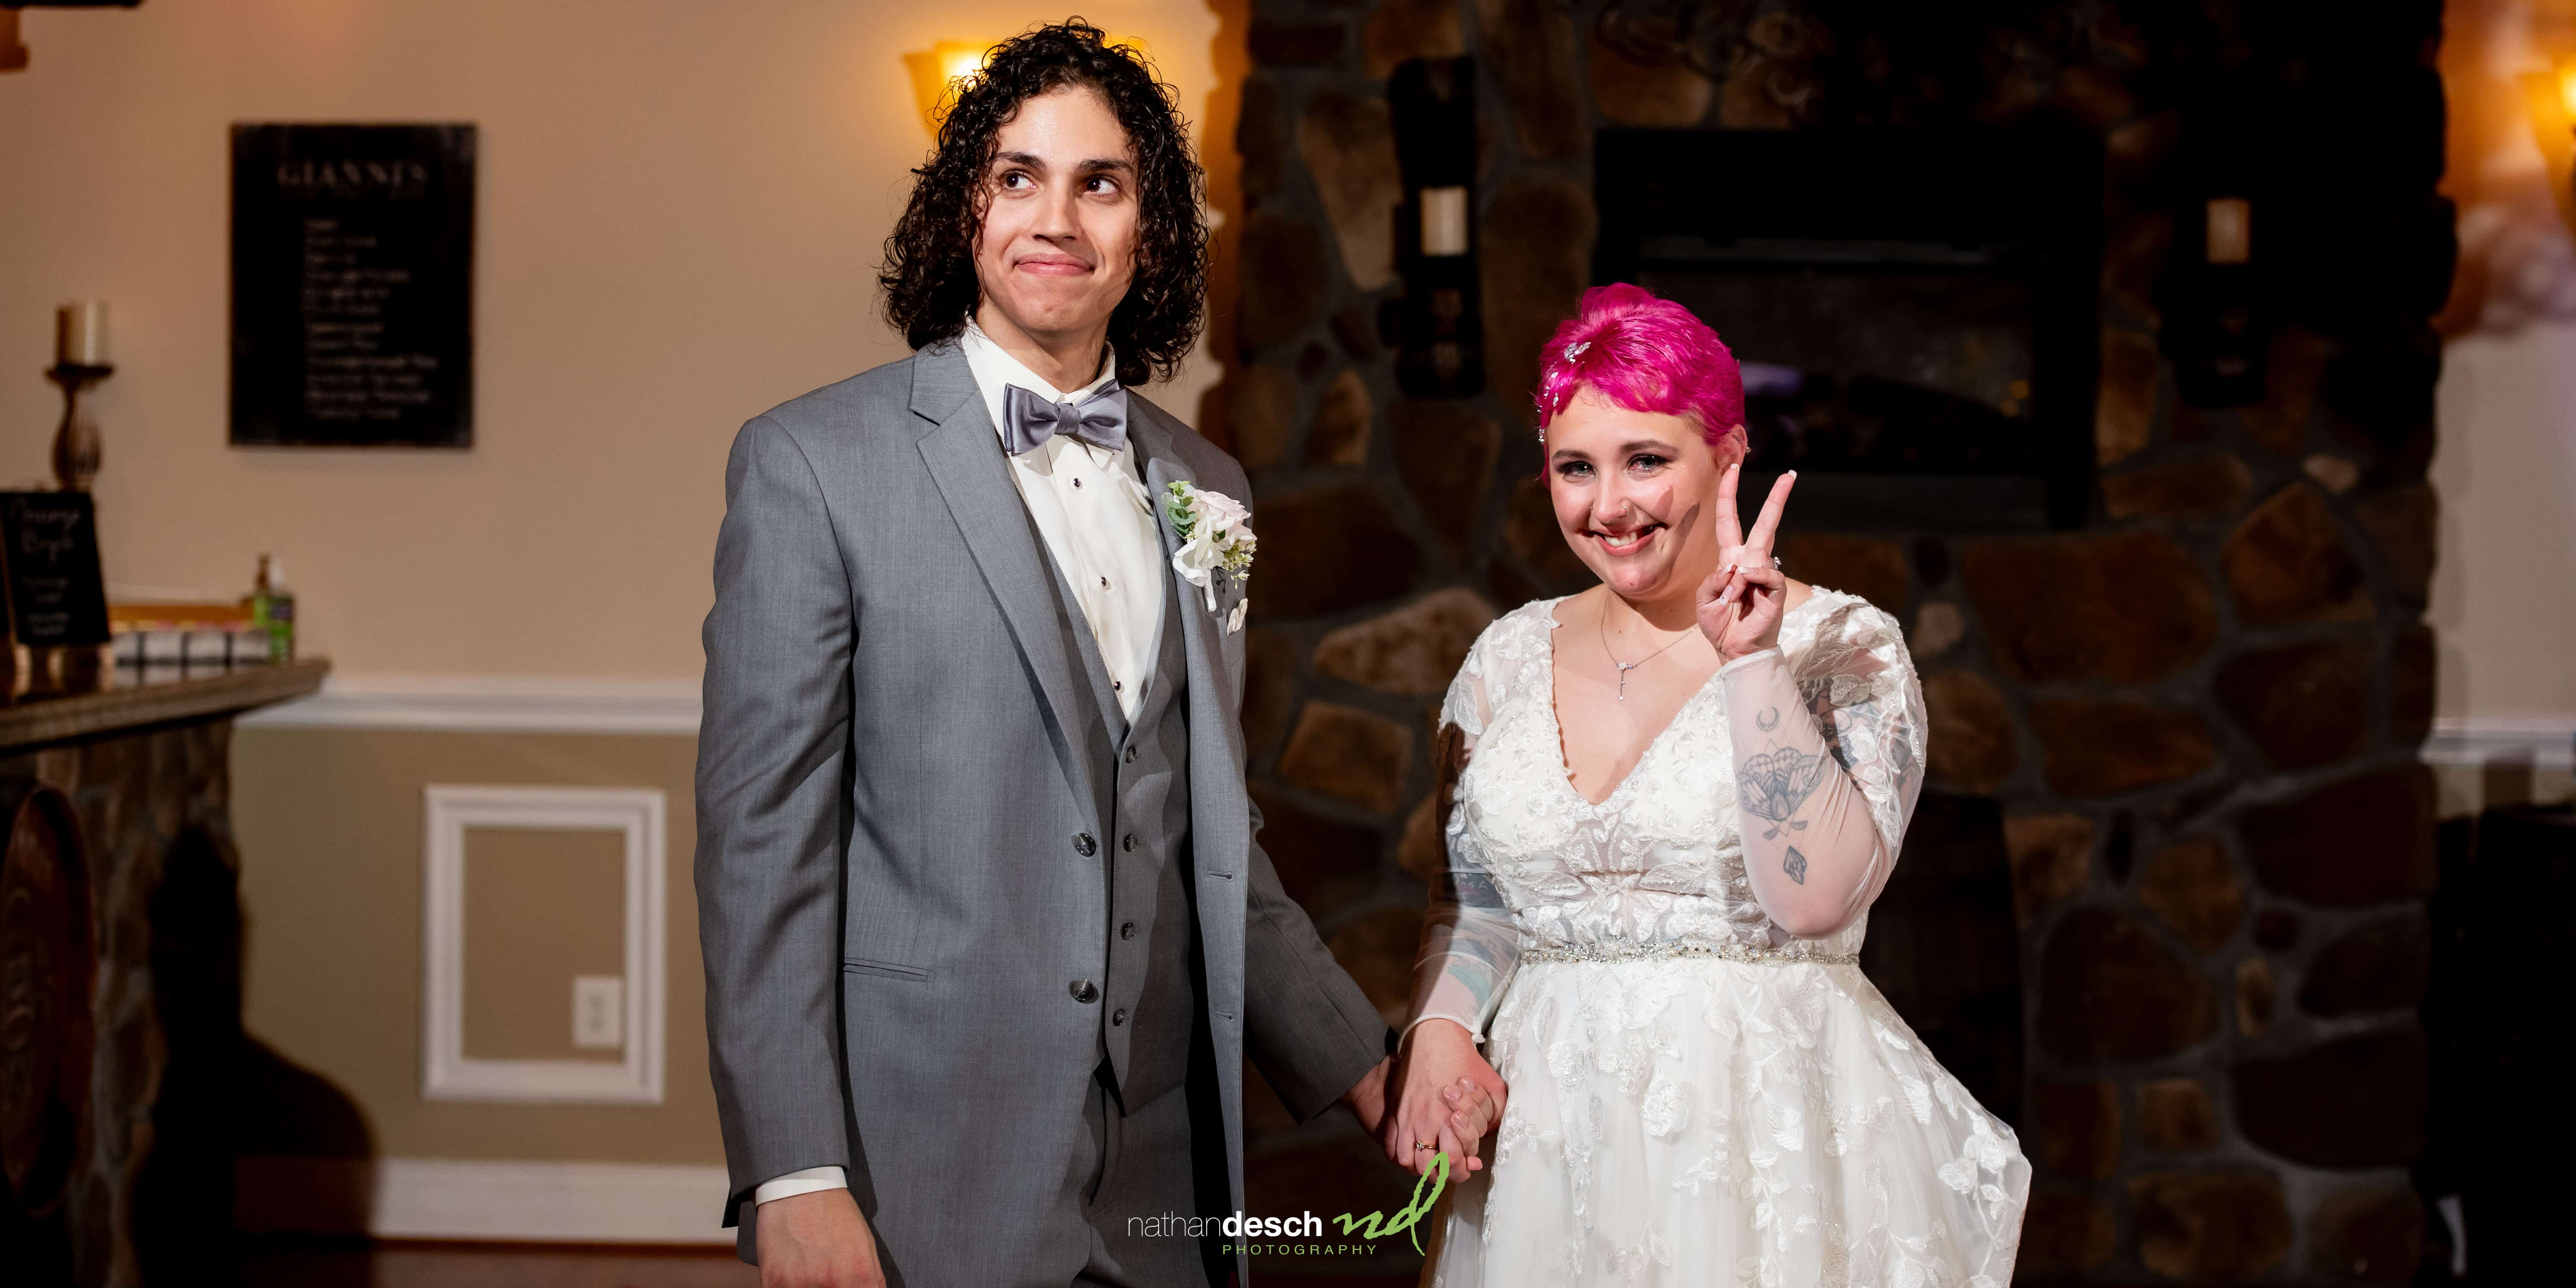 quirky bride and groom having fun at wedding